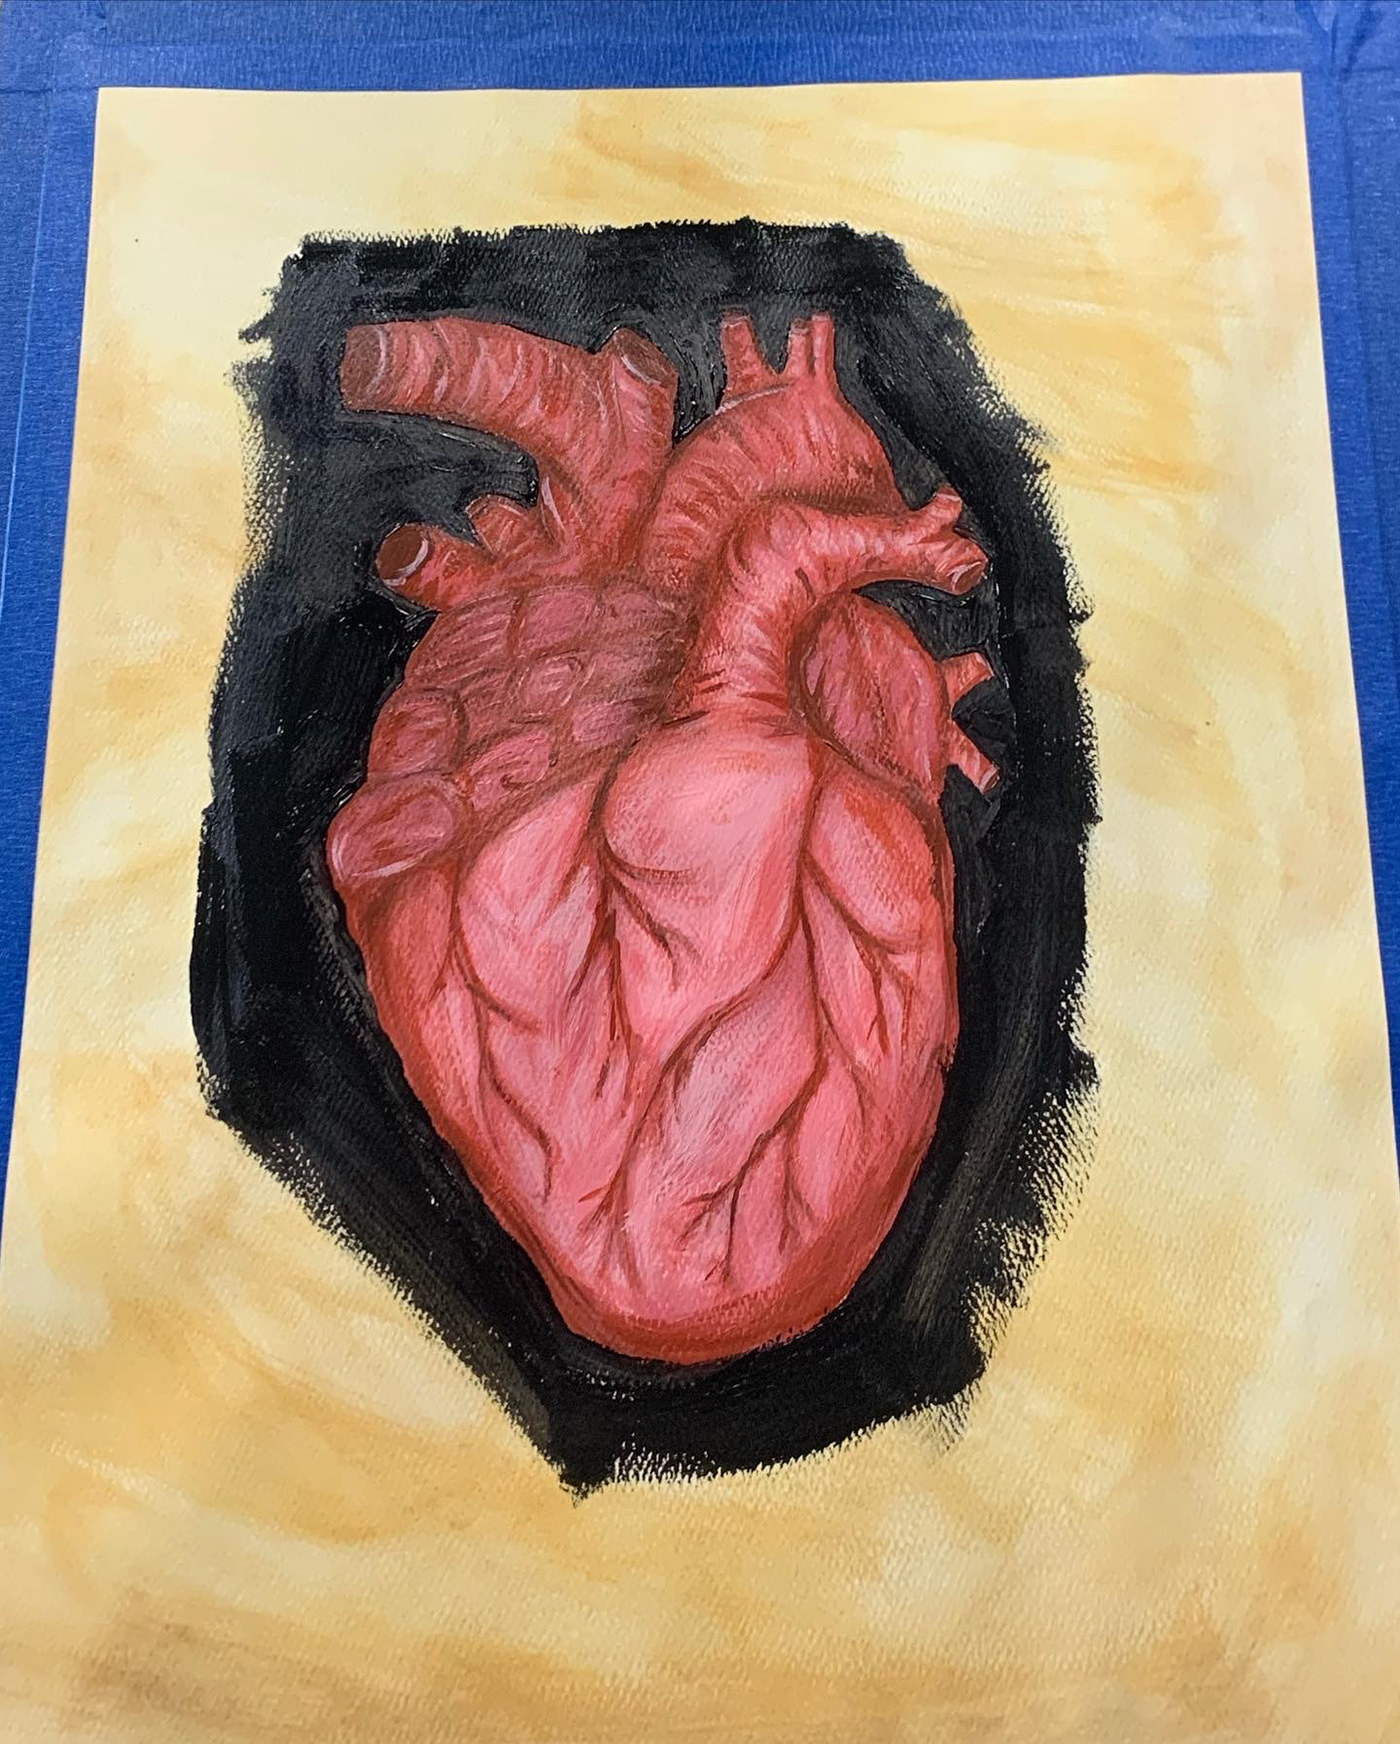 Acrylic paint heart image transfer ndcl